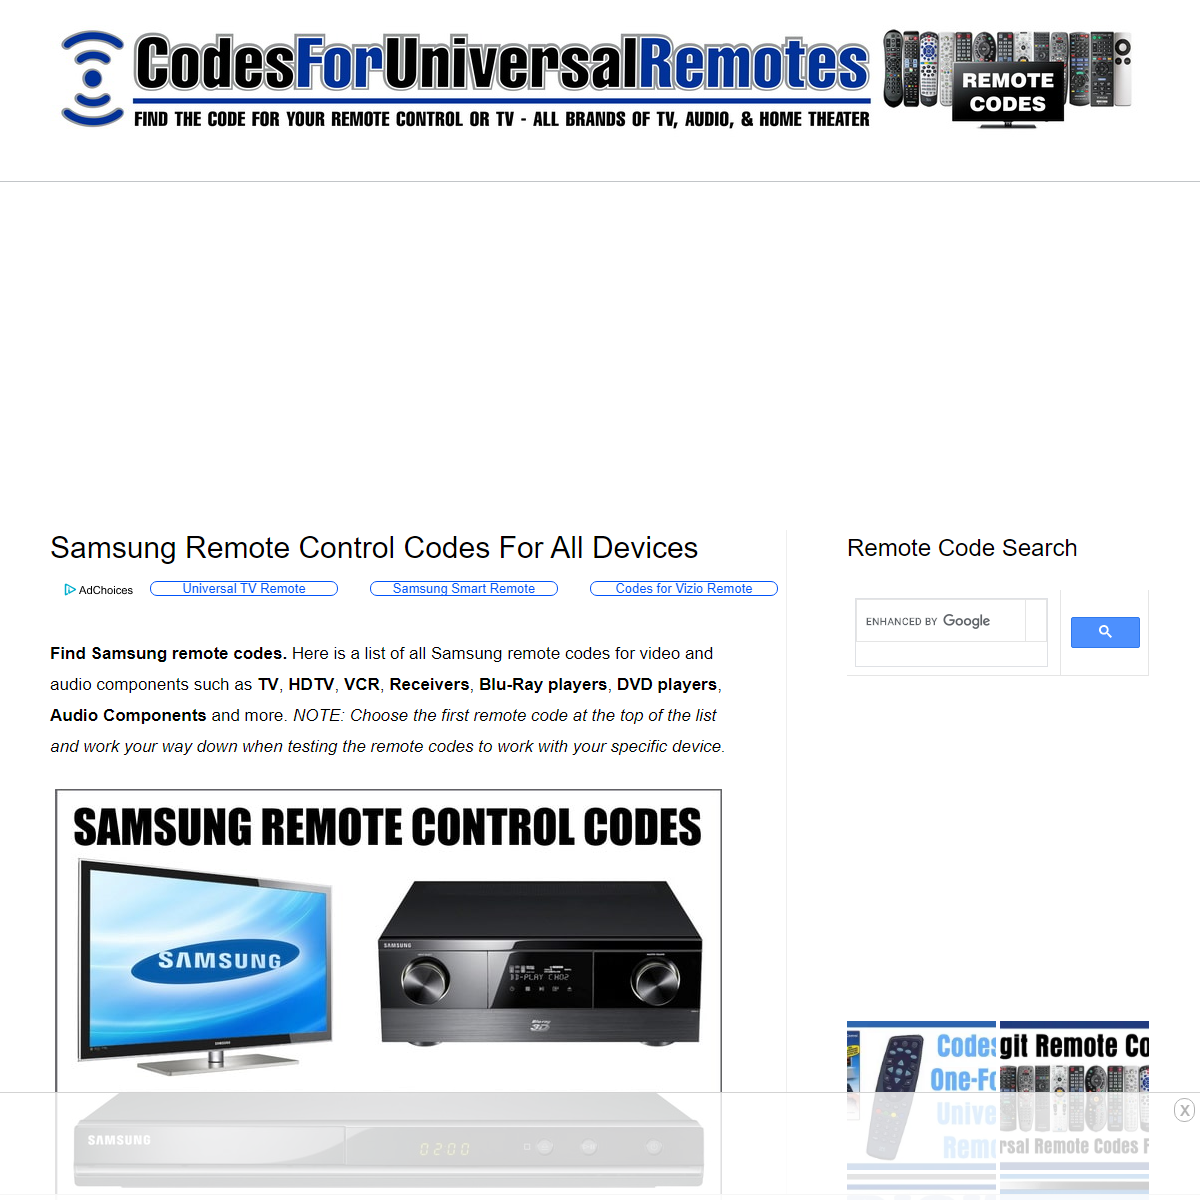 A complete backup of https://codesforuniversalremotes.com/samsung-remote-control-codes-for-all-devices/